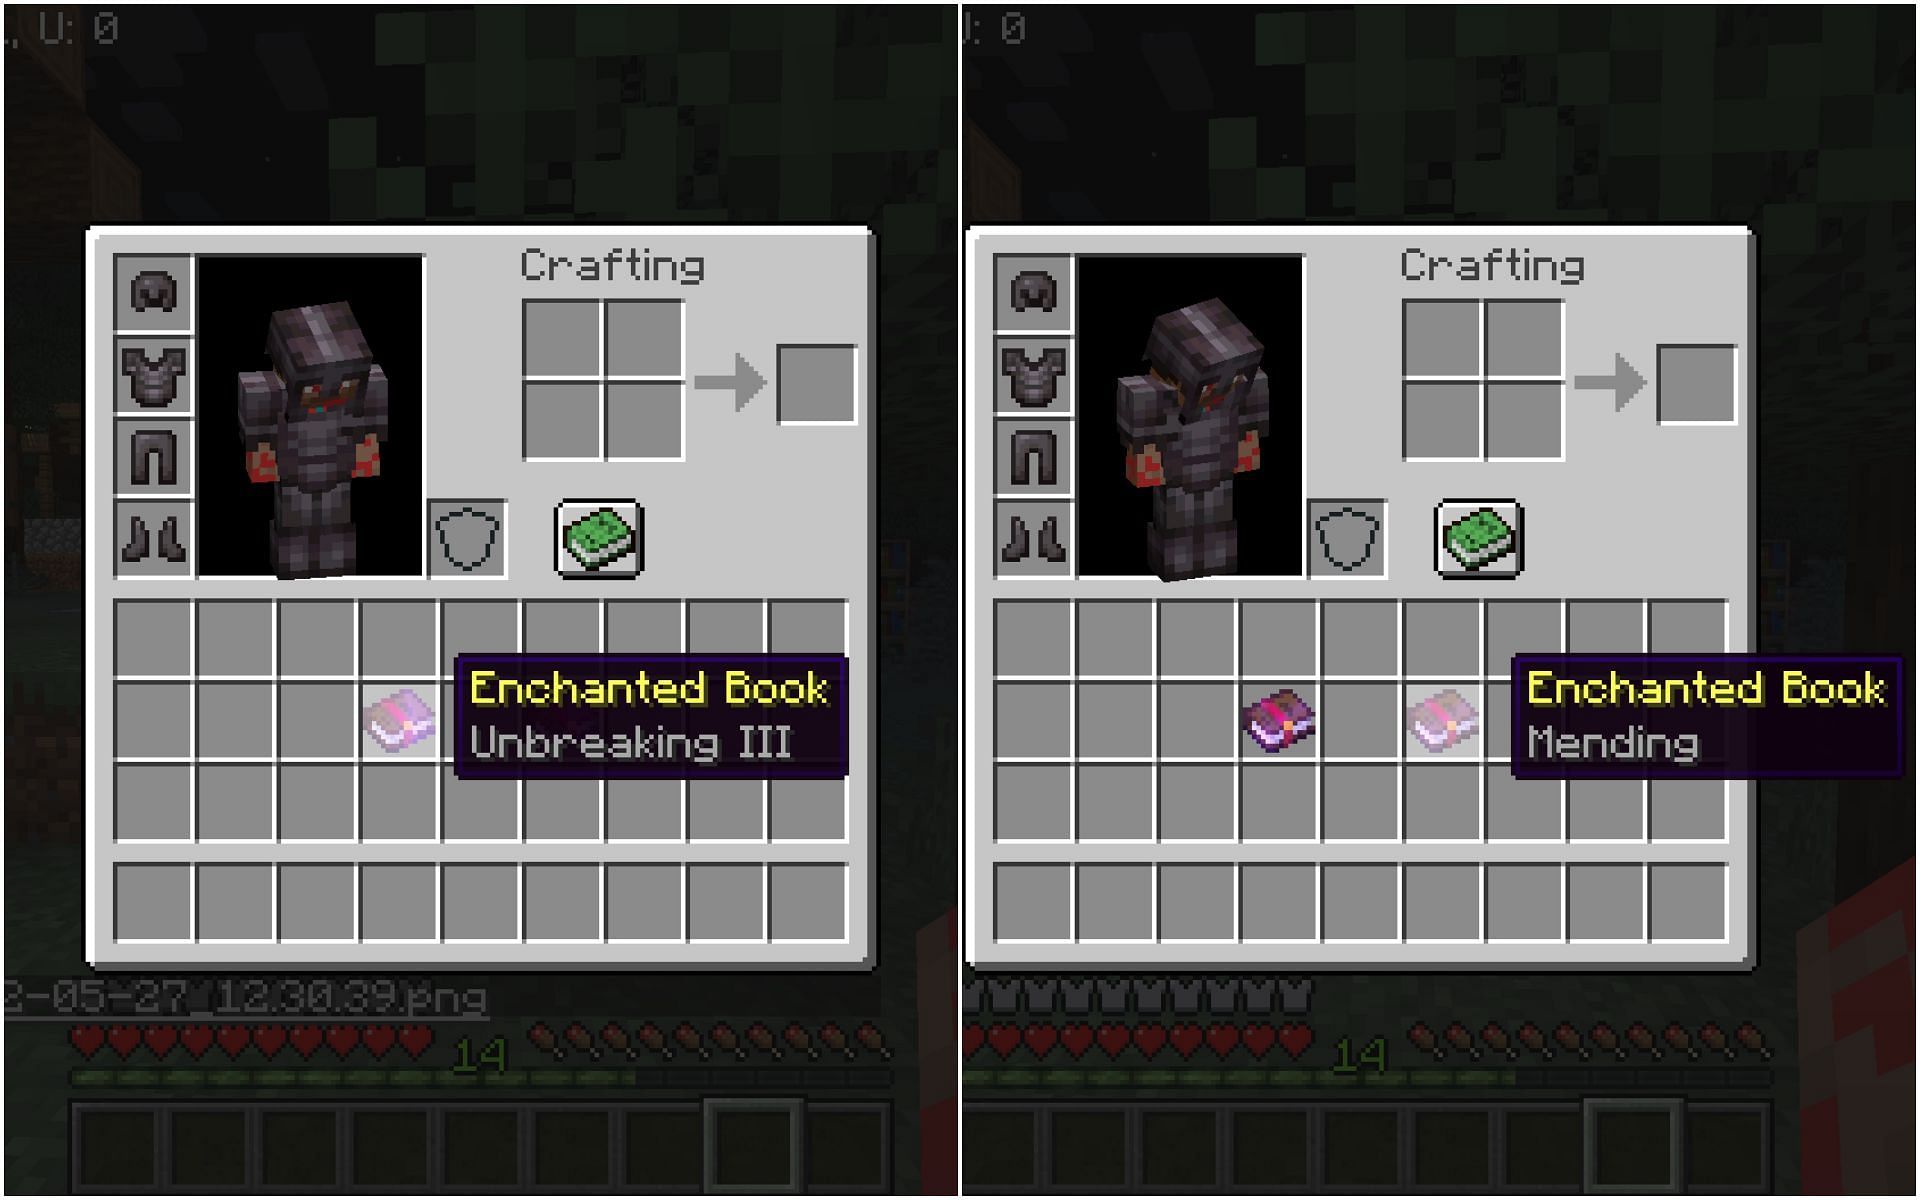 Unbreaking and Mending (Image via Minecraft)